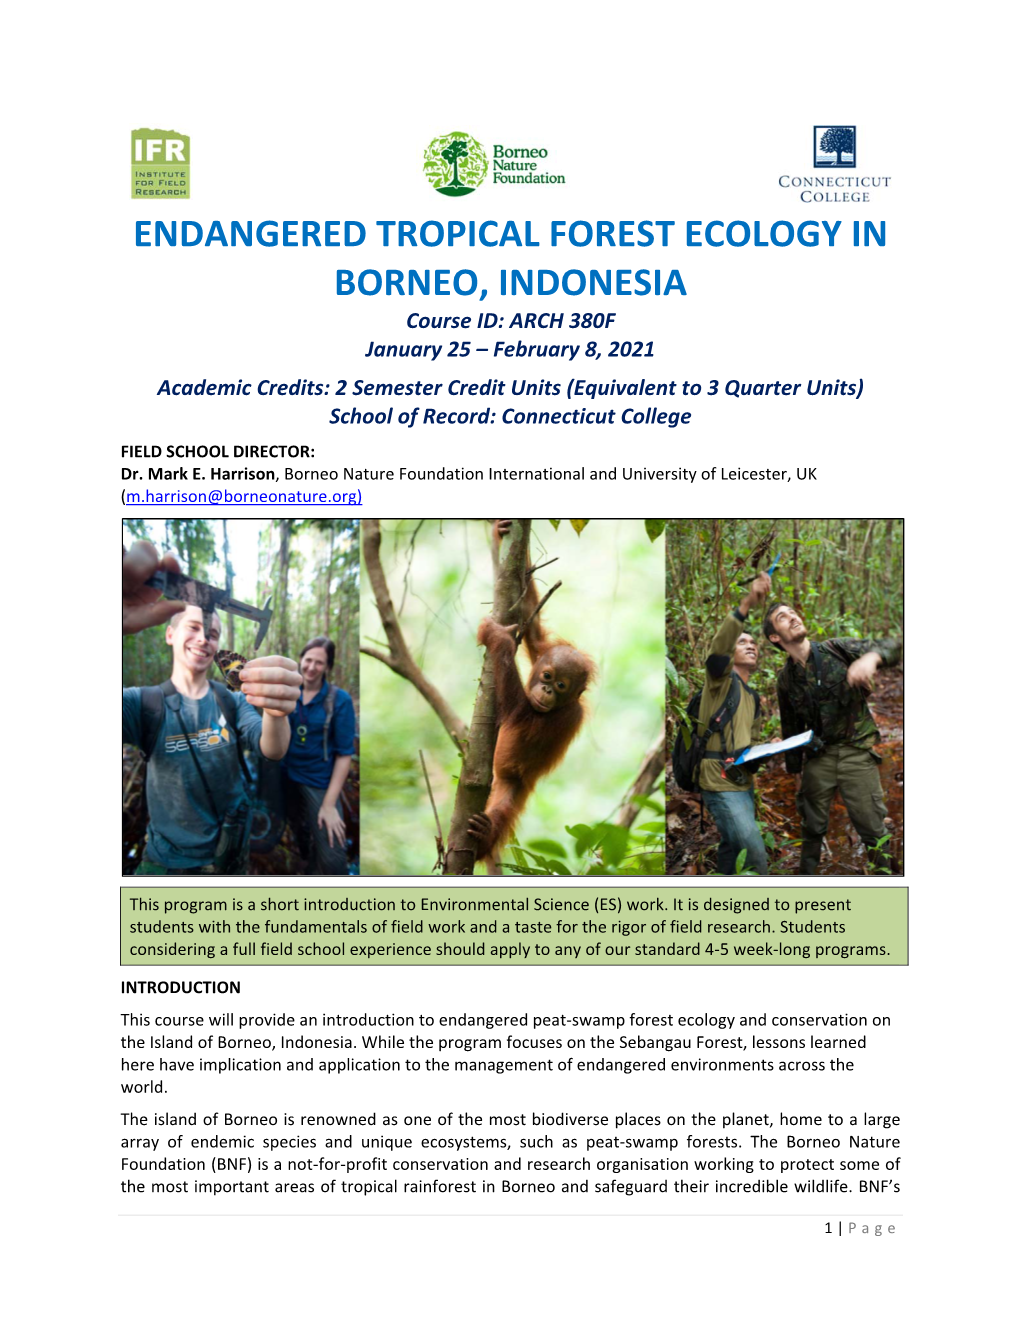 Endangered Tropical Forest Ecology in Borneo, Indonesia